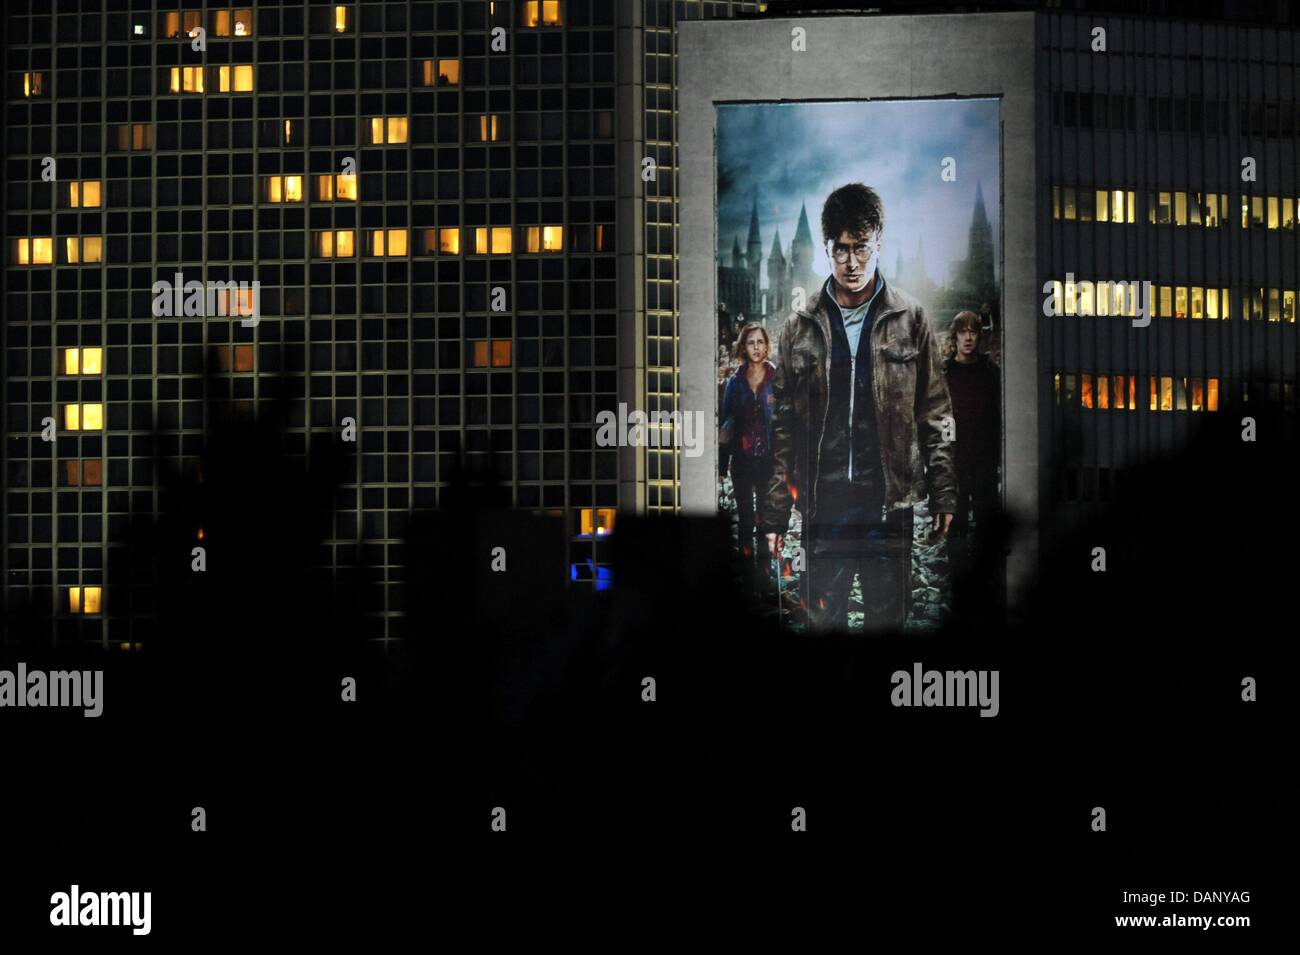 A giant image of Harry Potter is placed at Berlin Alexanderplatz, Germany, 14 July 2011. The poster is an advertisement for the new and last Harry Potter movie currently screened in cinemas in Berlin. Photo: Maurizio Gambarini Stock Photo